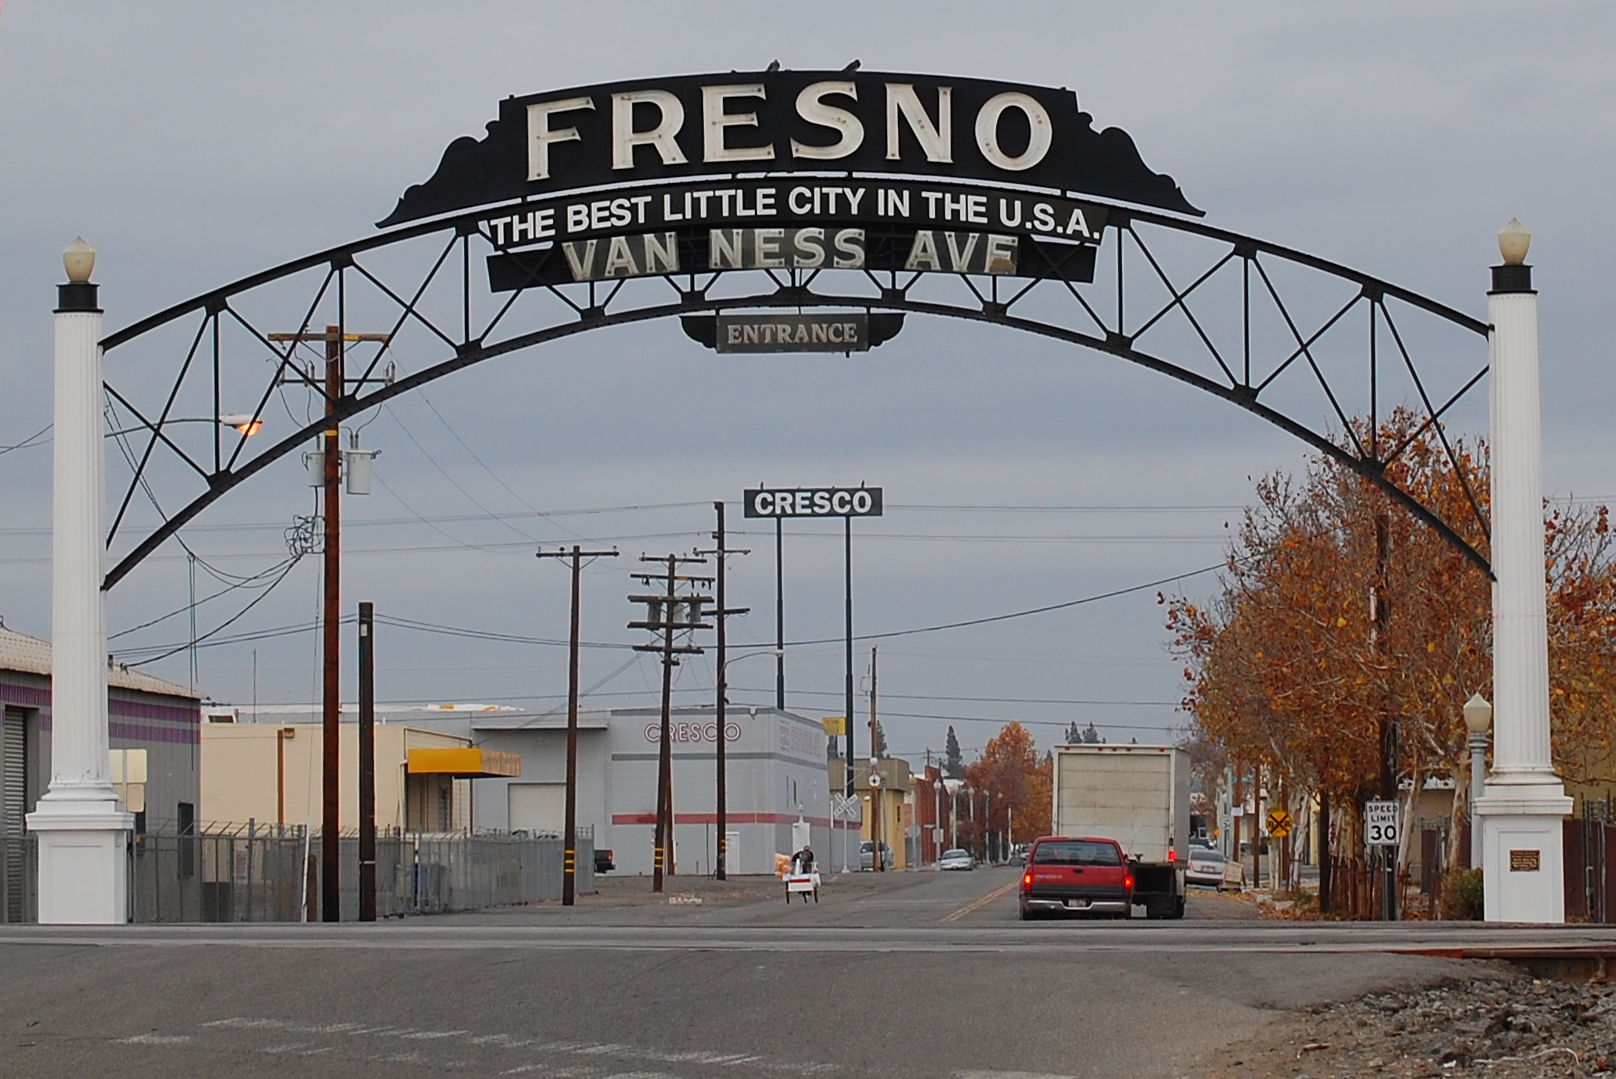 Travel and destinations: Fresno day trip summer vacation